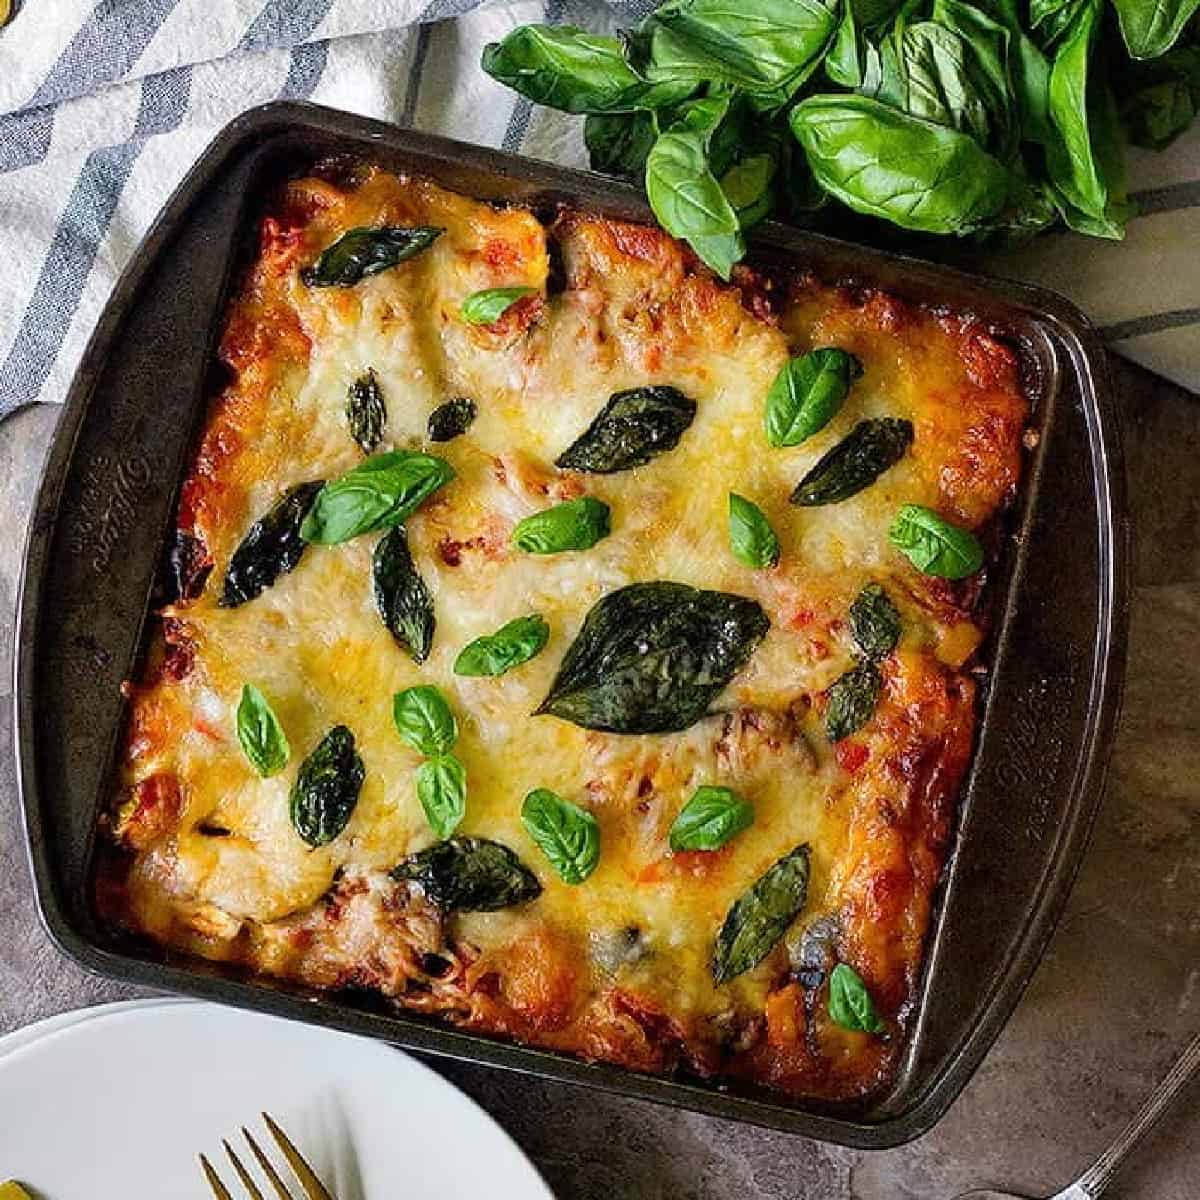 This is an easy vegetable lasagna recipe that is perfect for any day of the week. This vegetarian lasagna is cheesy, packed with veggies and absolutely delicious! 
